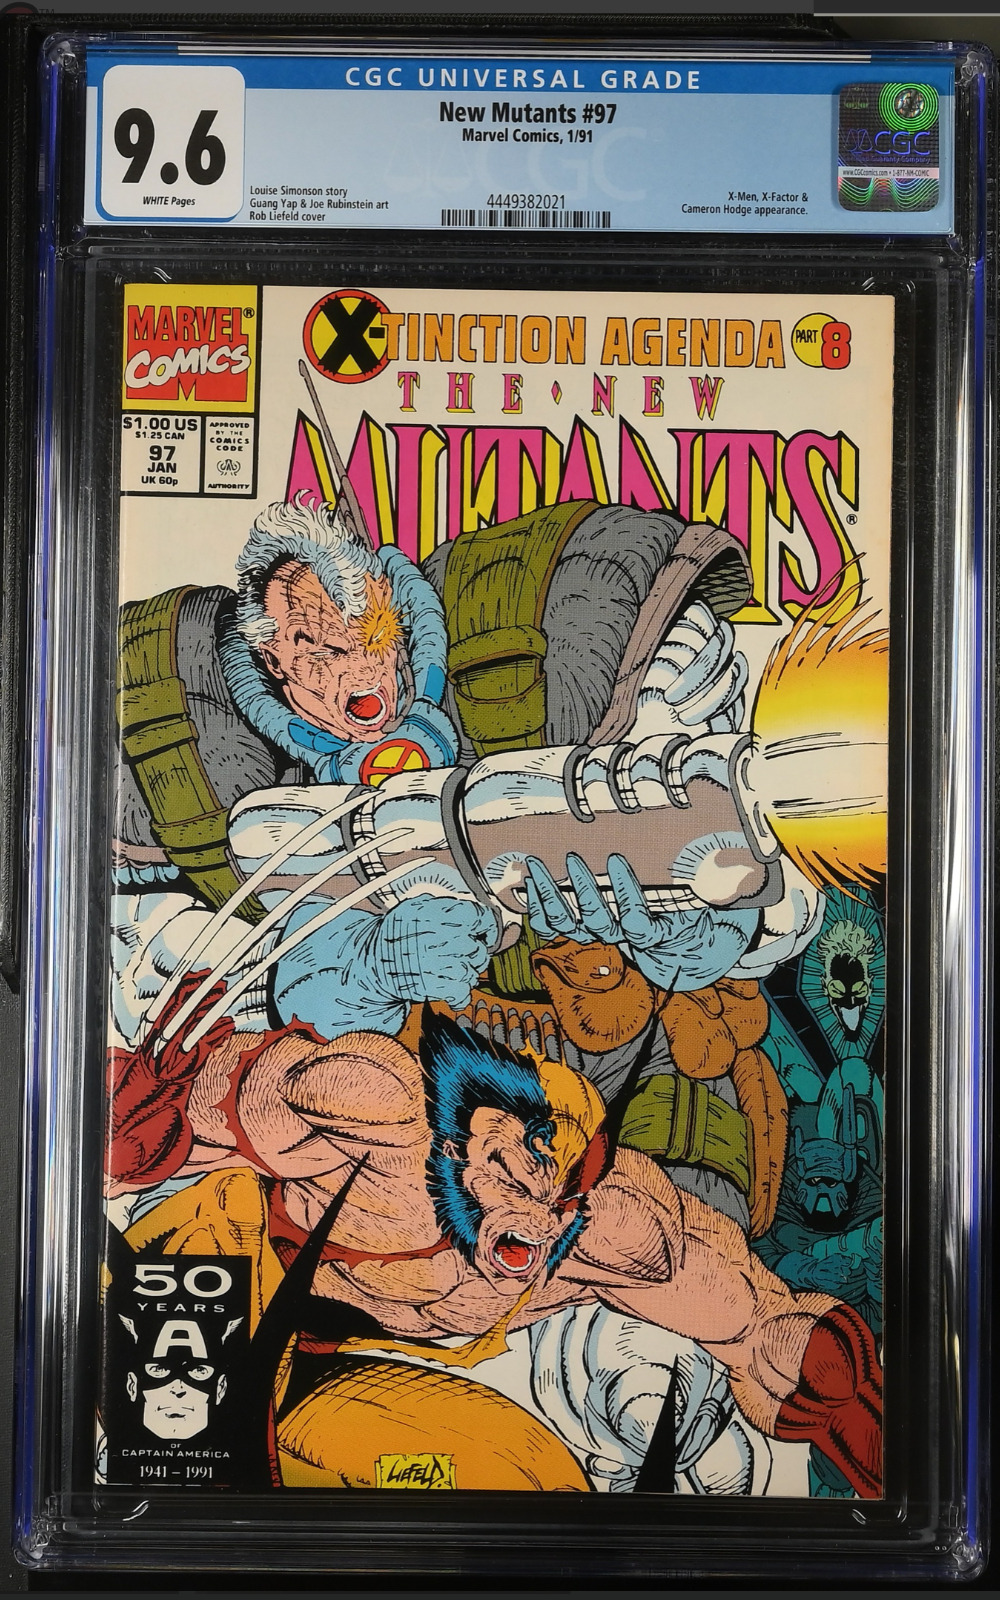 💎🔥 New Mutants #97 CGC 9.6 Marvel 1991 Cable Wolverine💎🔥Liefeld goodness